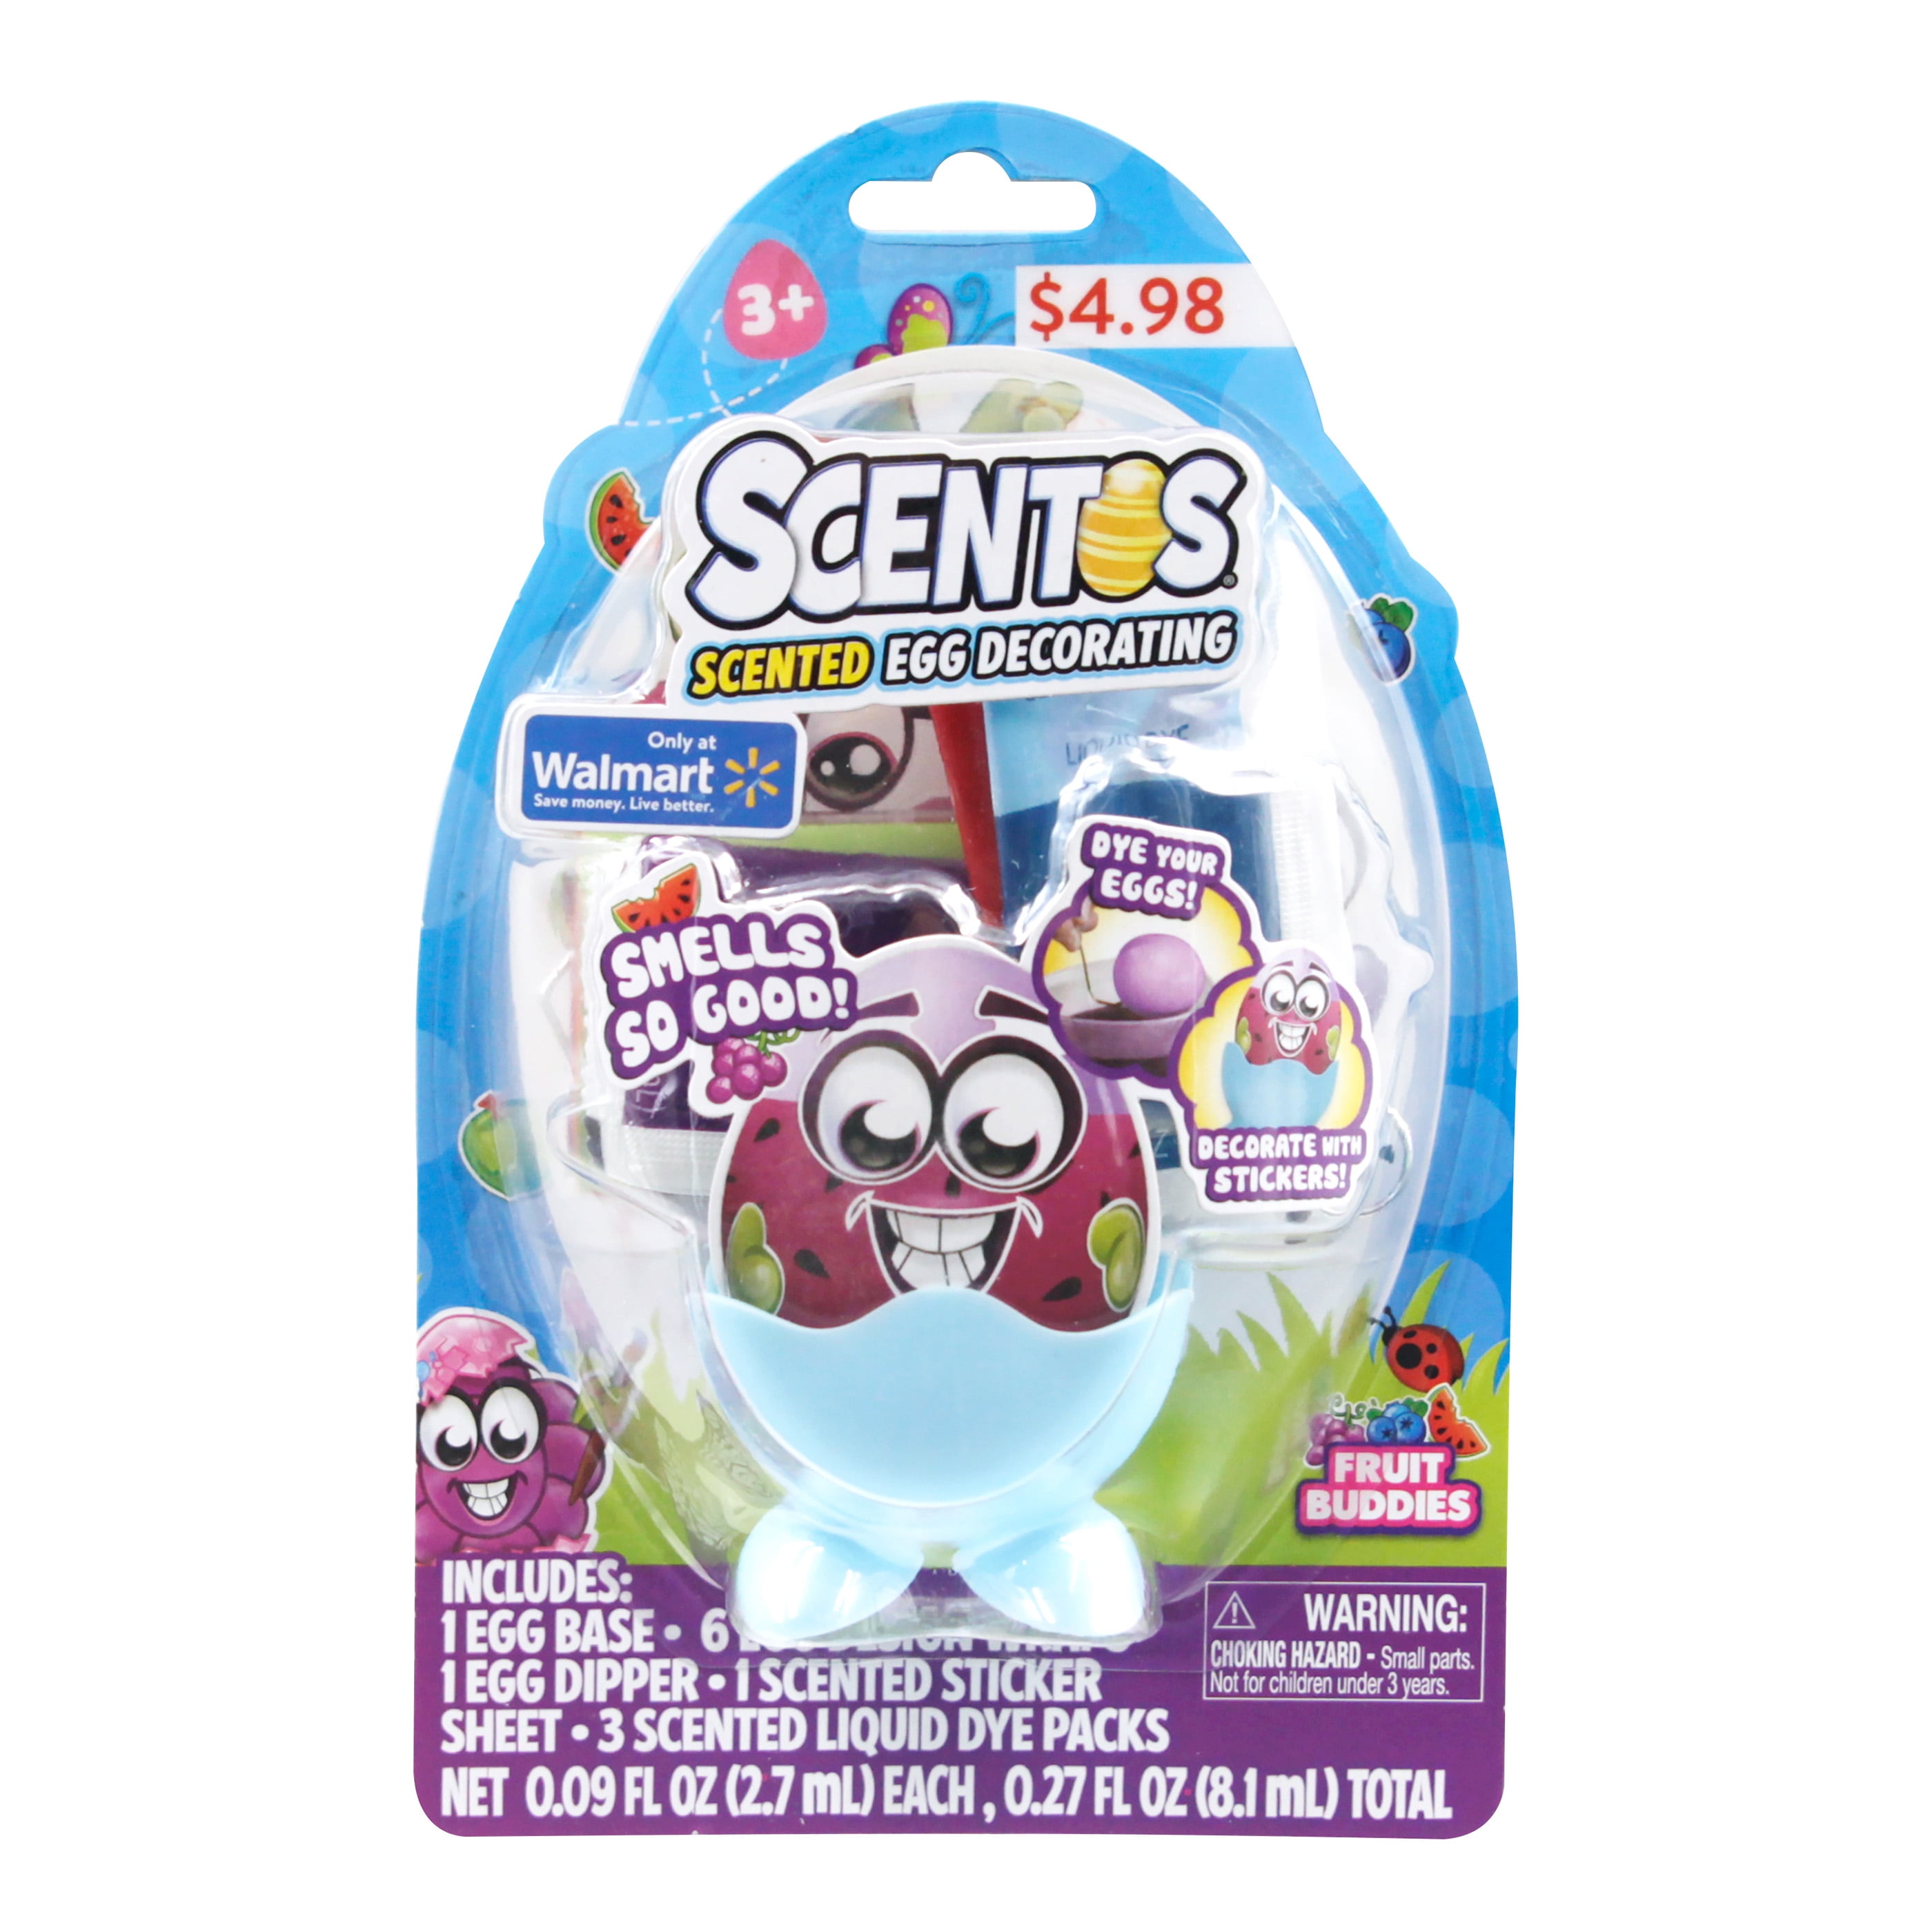 Scentos Scented Easter Themed Fruit Buddies Egg Decorating Kit - Ages 3+ - Only at Walmart